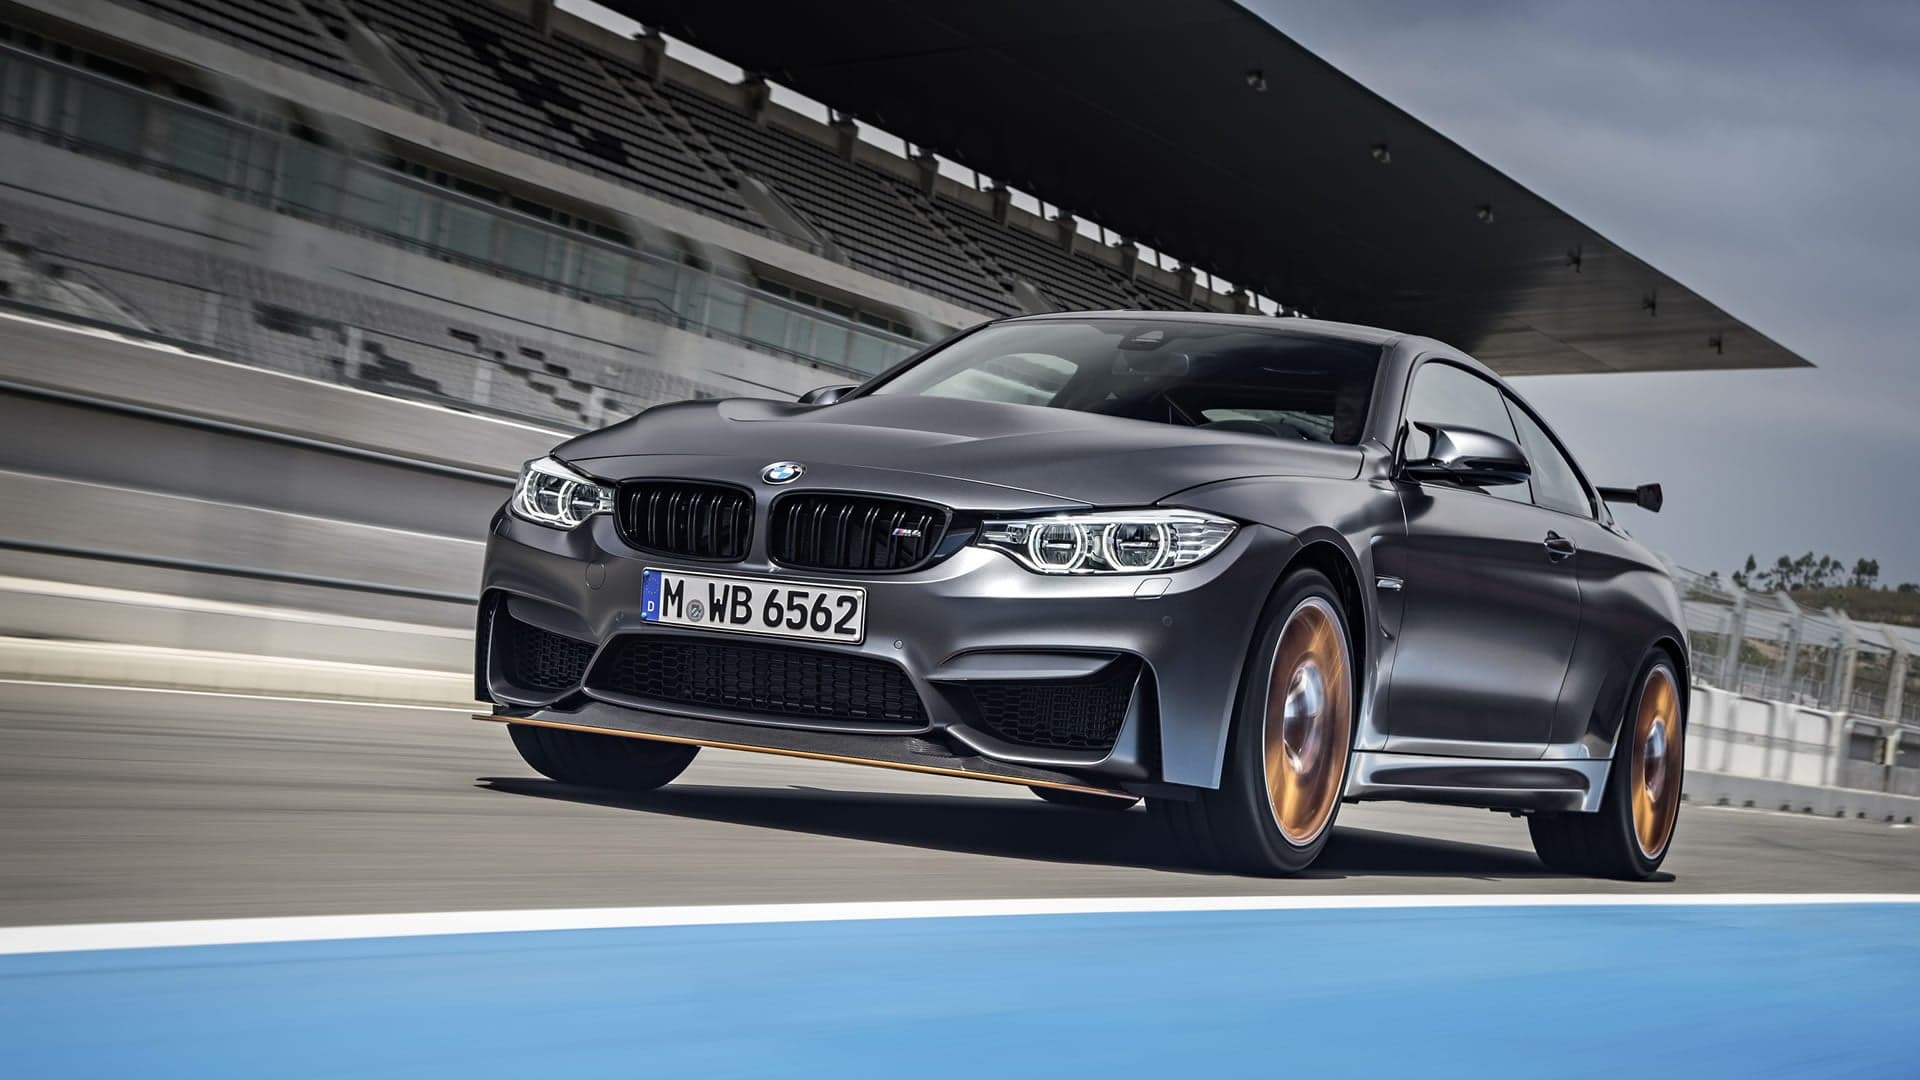 A Dealer Marked This BMW M4 GTS Up by $100,000